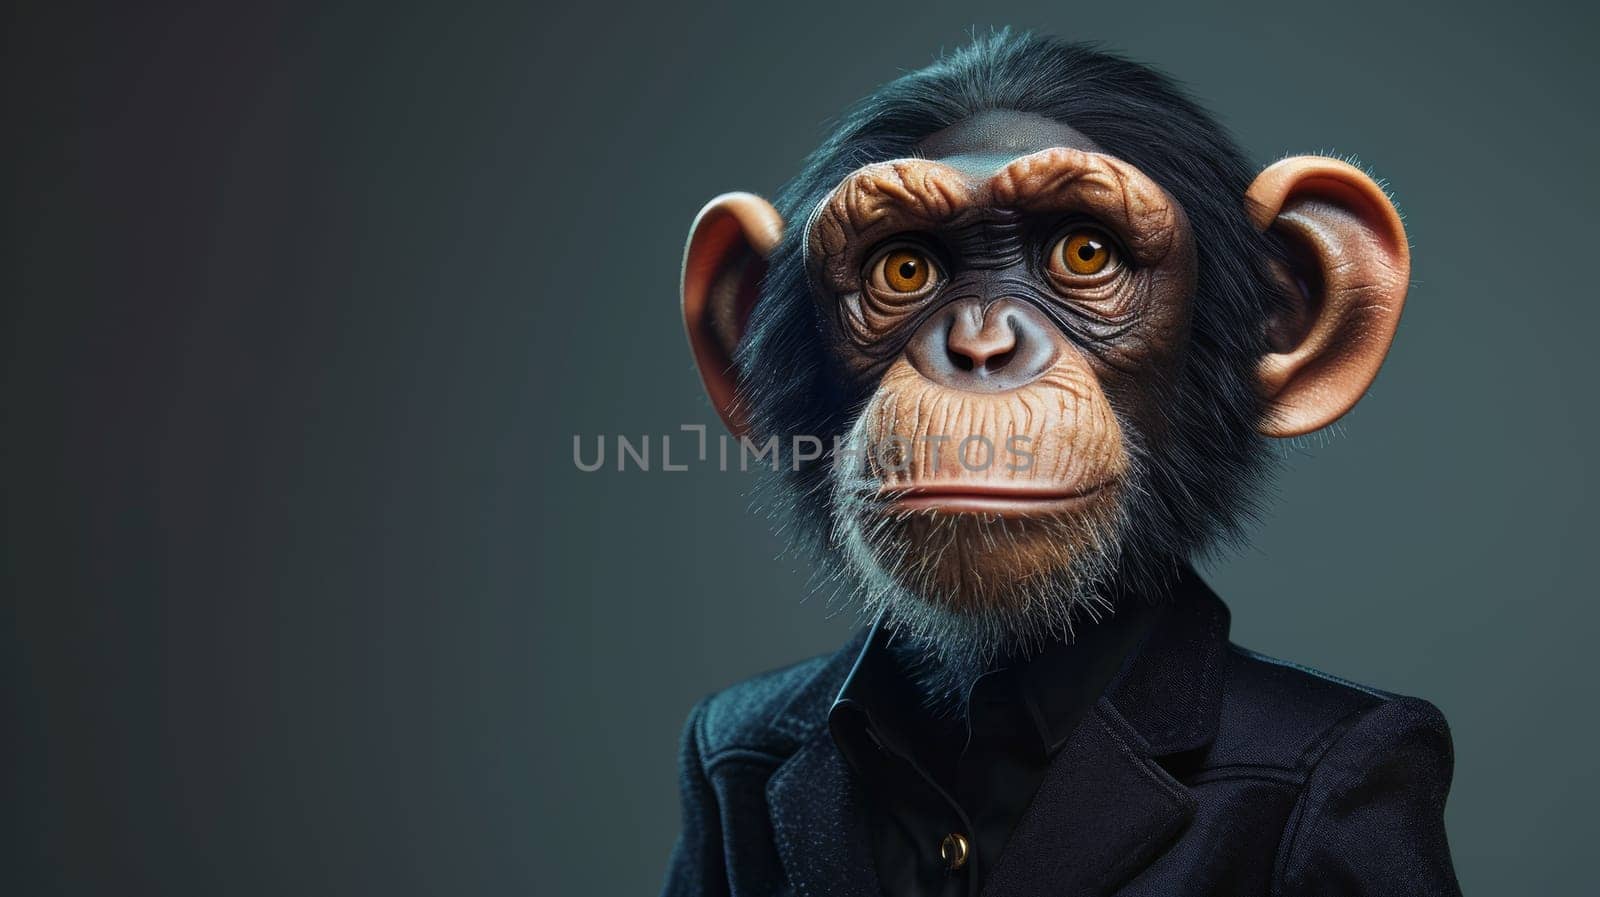 A chimpanzee wearing a black suit and tie with glasses